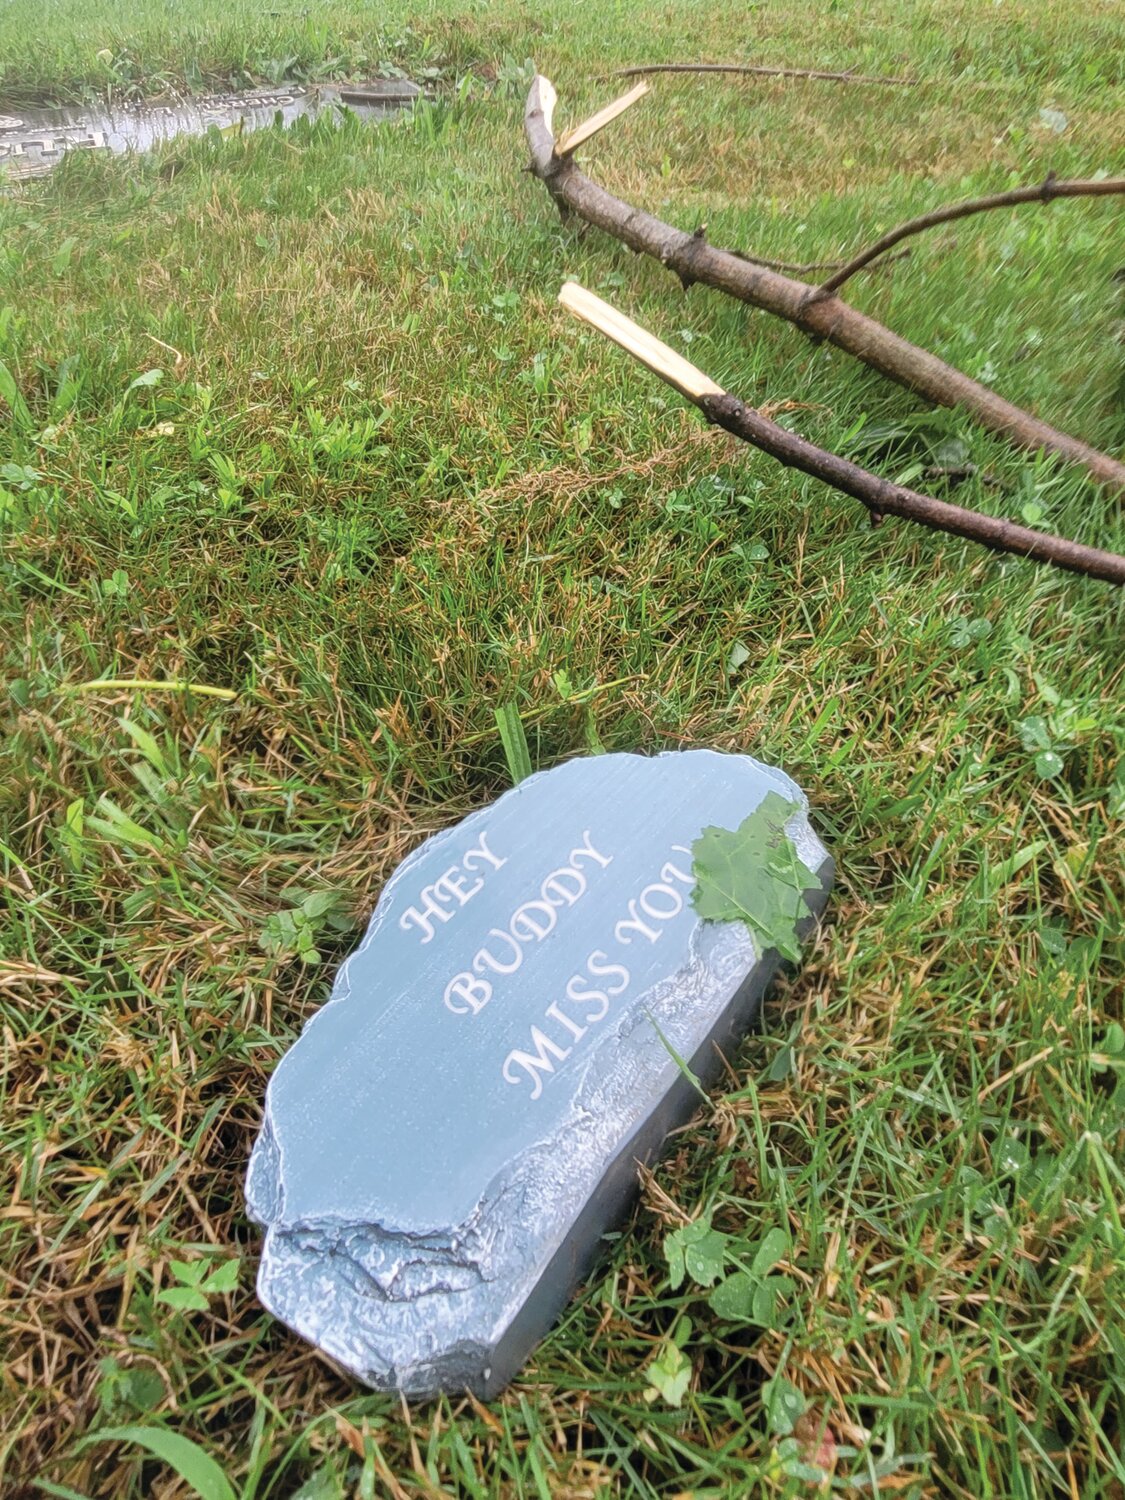 MEMENTOS SCATTERED: The tiny memories and tokens of affection that loved ones have left on the graves of family and friends were scattered across the burial grounds at Highland Memorial Park Cemetery in Johnston during Friday’s severe storm.